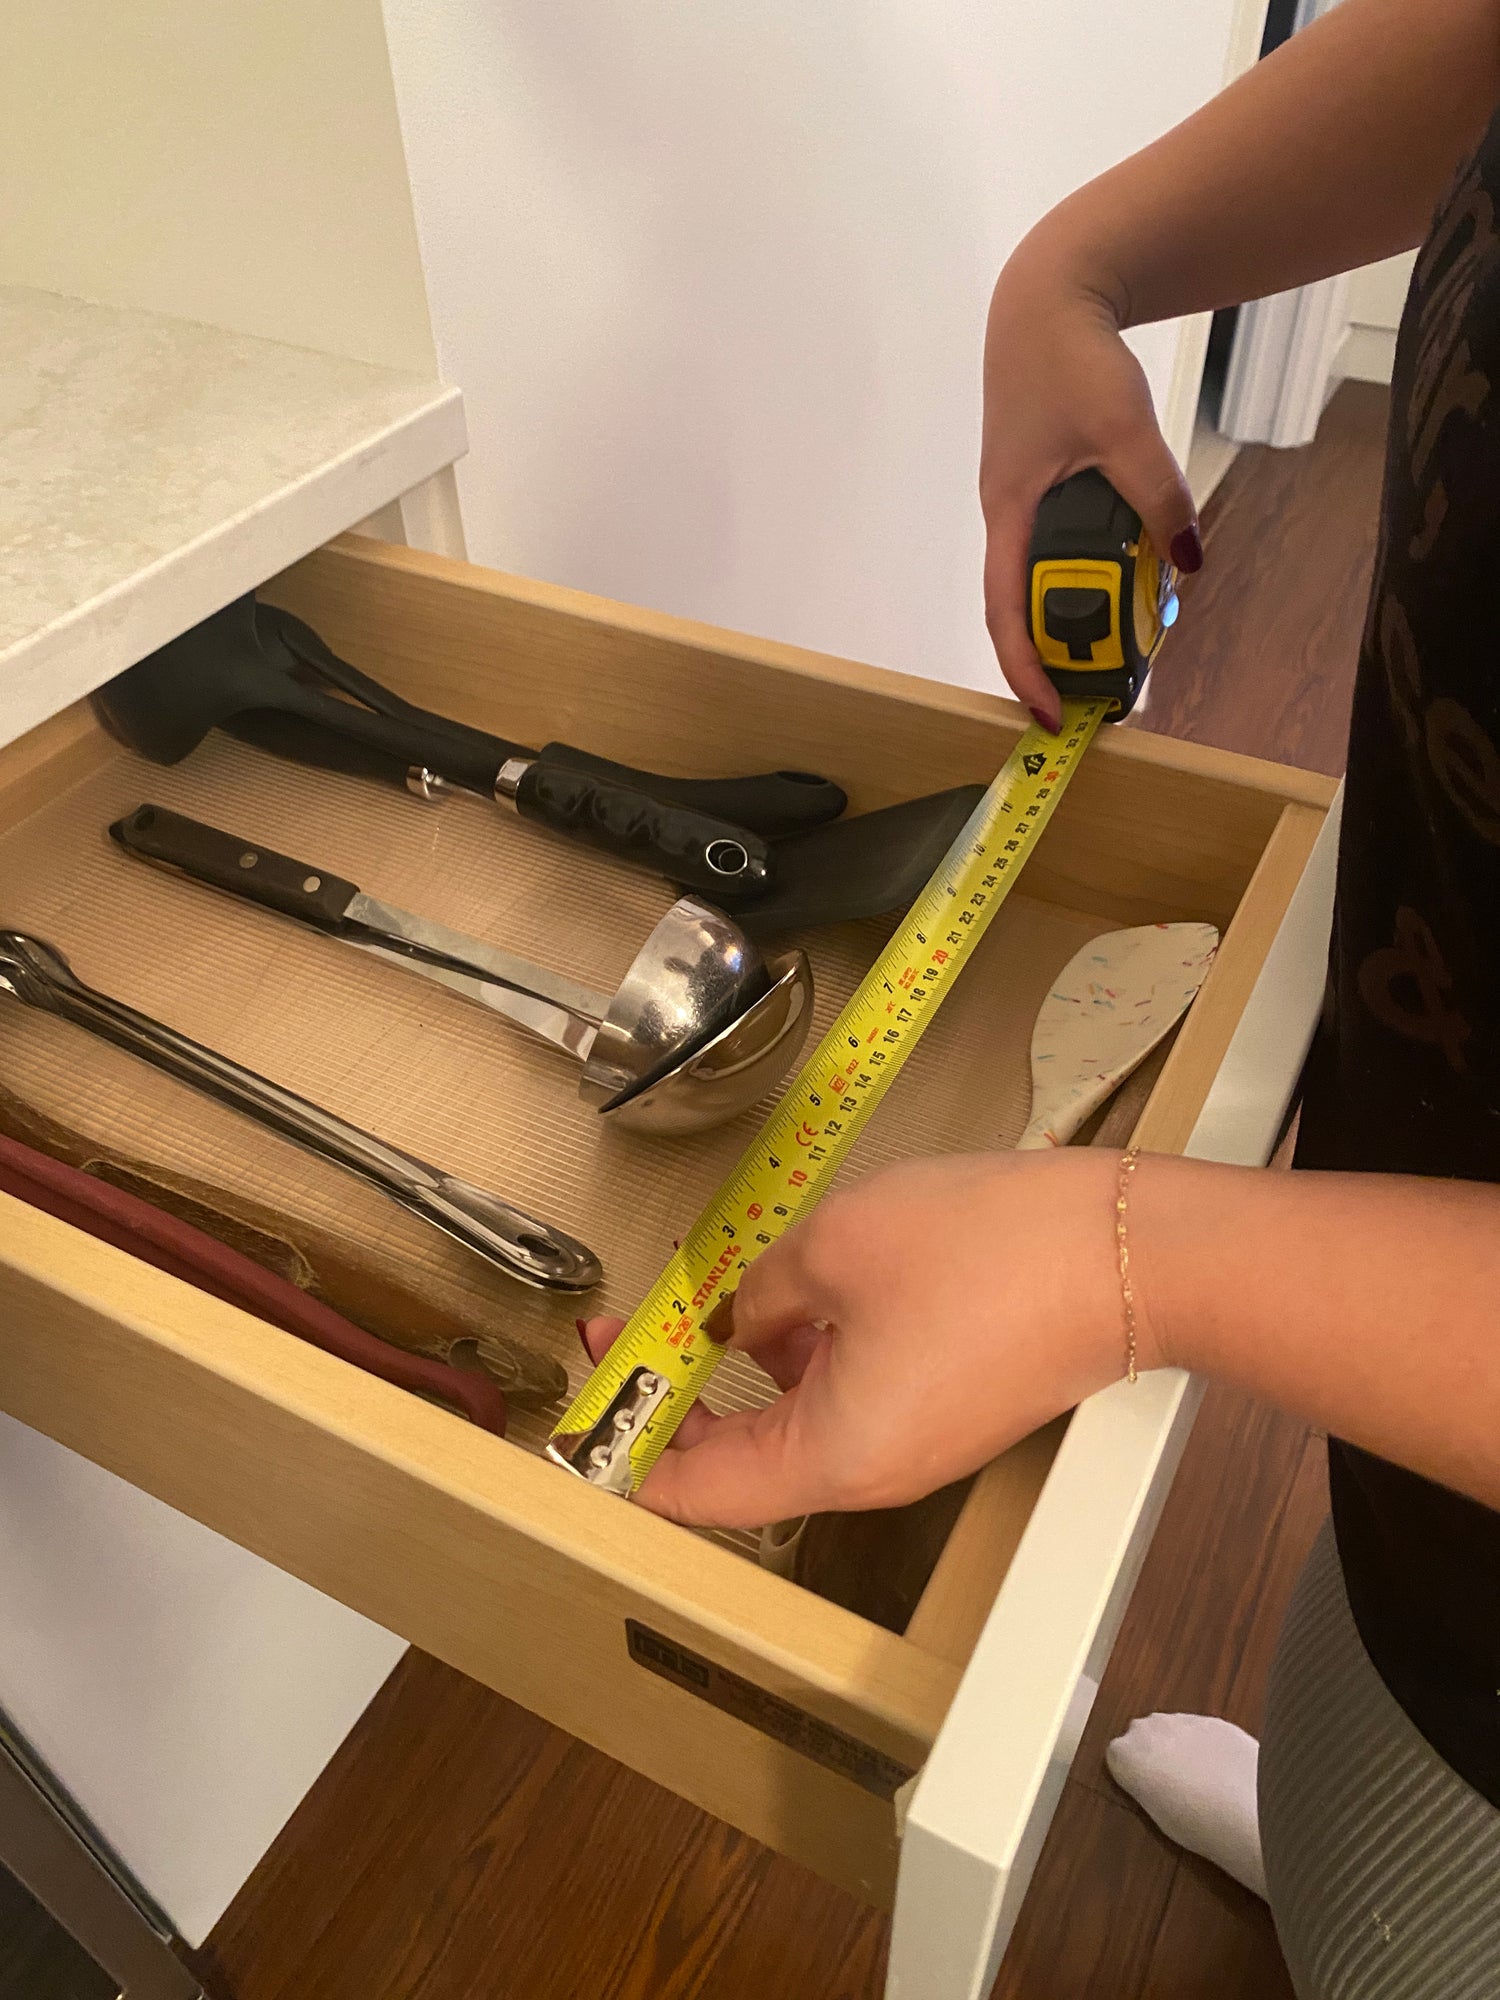 An open drawer with kitchen utensils and a woman's hands using a measuring tape to measure the width of the drawer